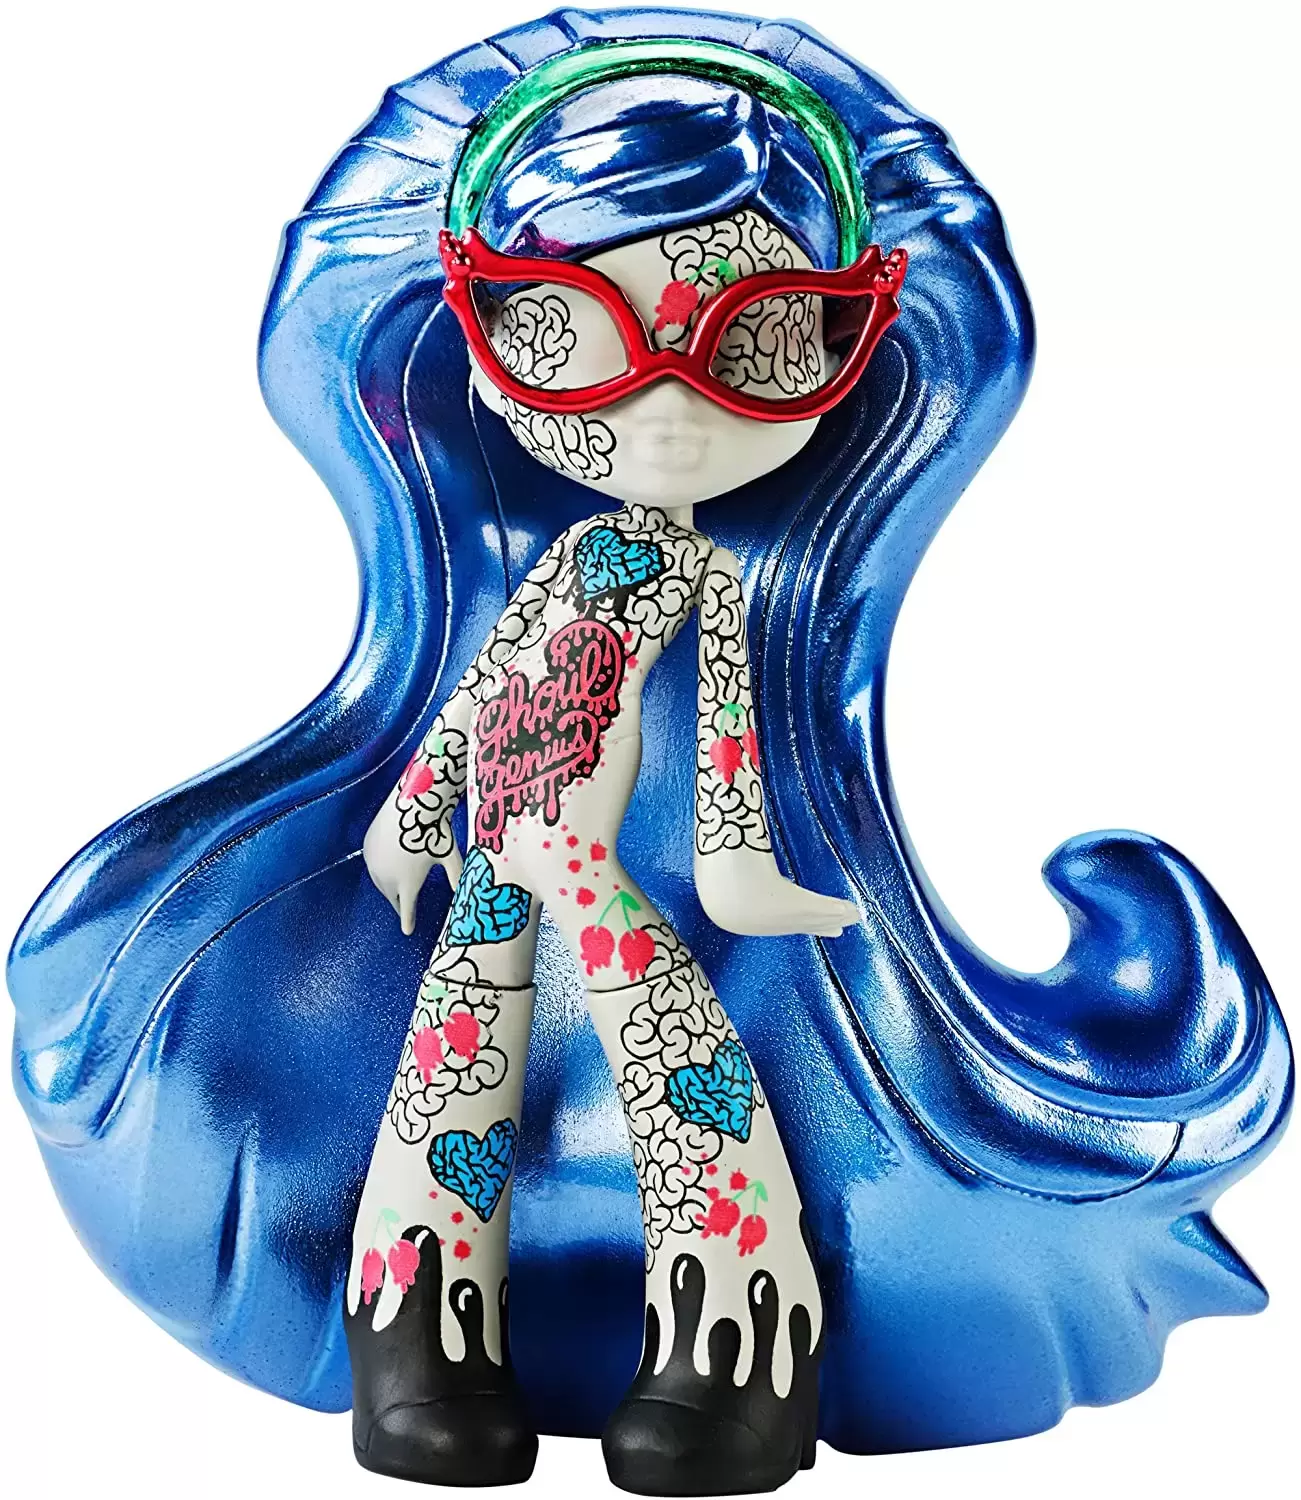 Monster High Vinyl - Ghoulia Yelps (Chase Variant)